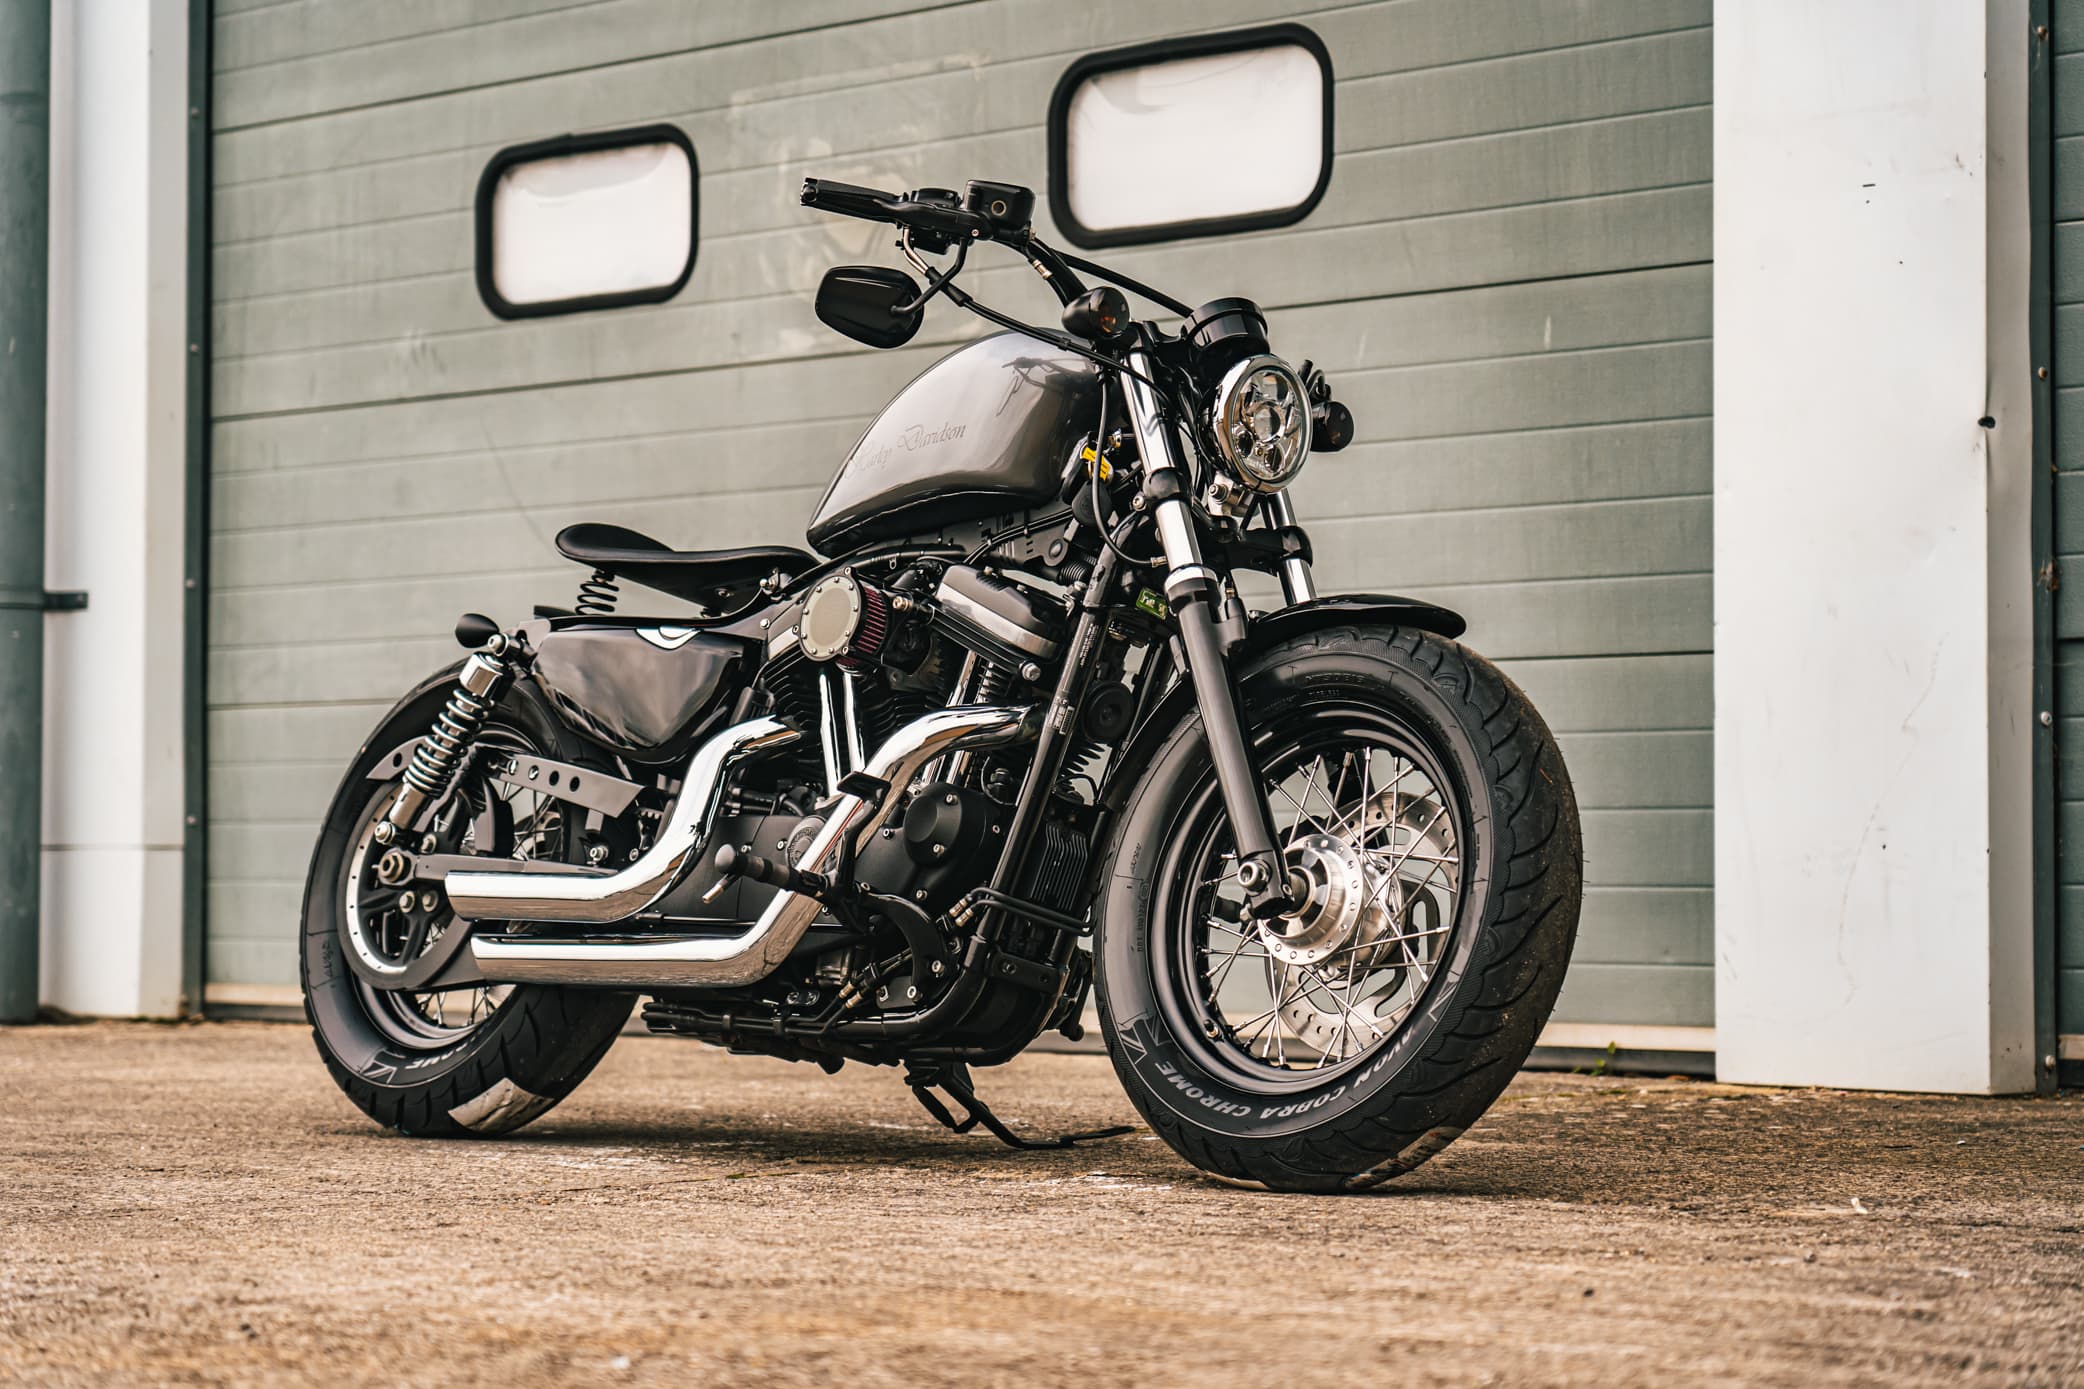 2014 Harley Davidson Forty Eight by Norse Customs - 23rd Feb